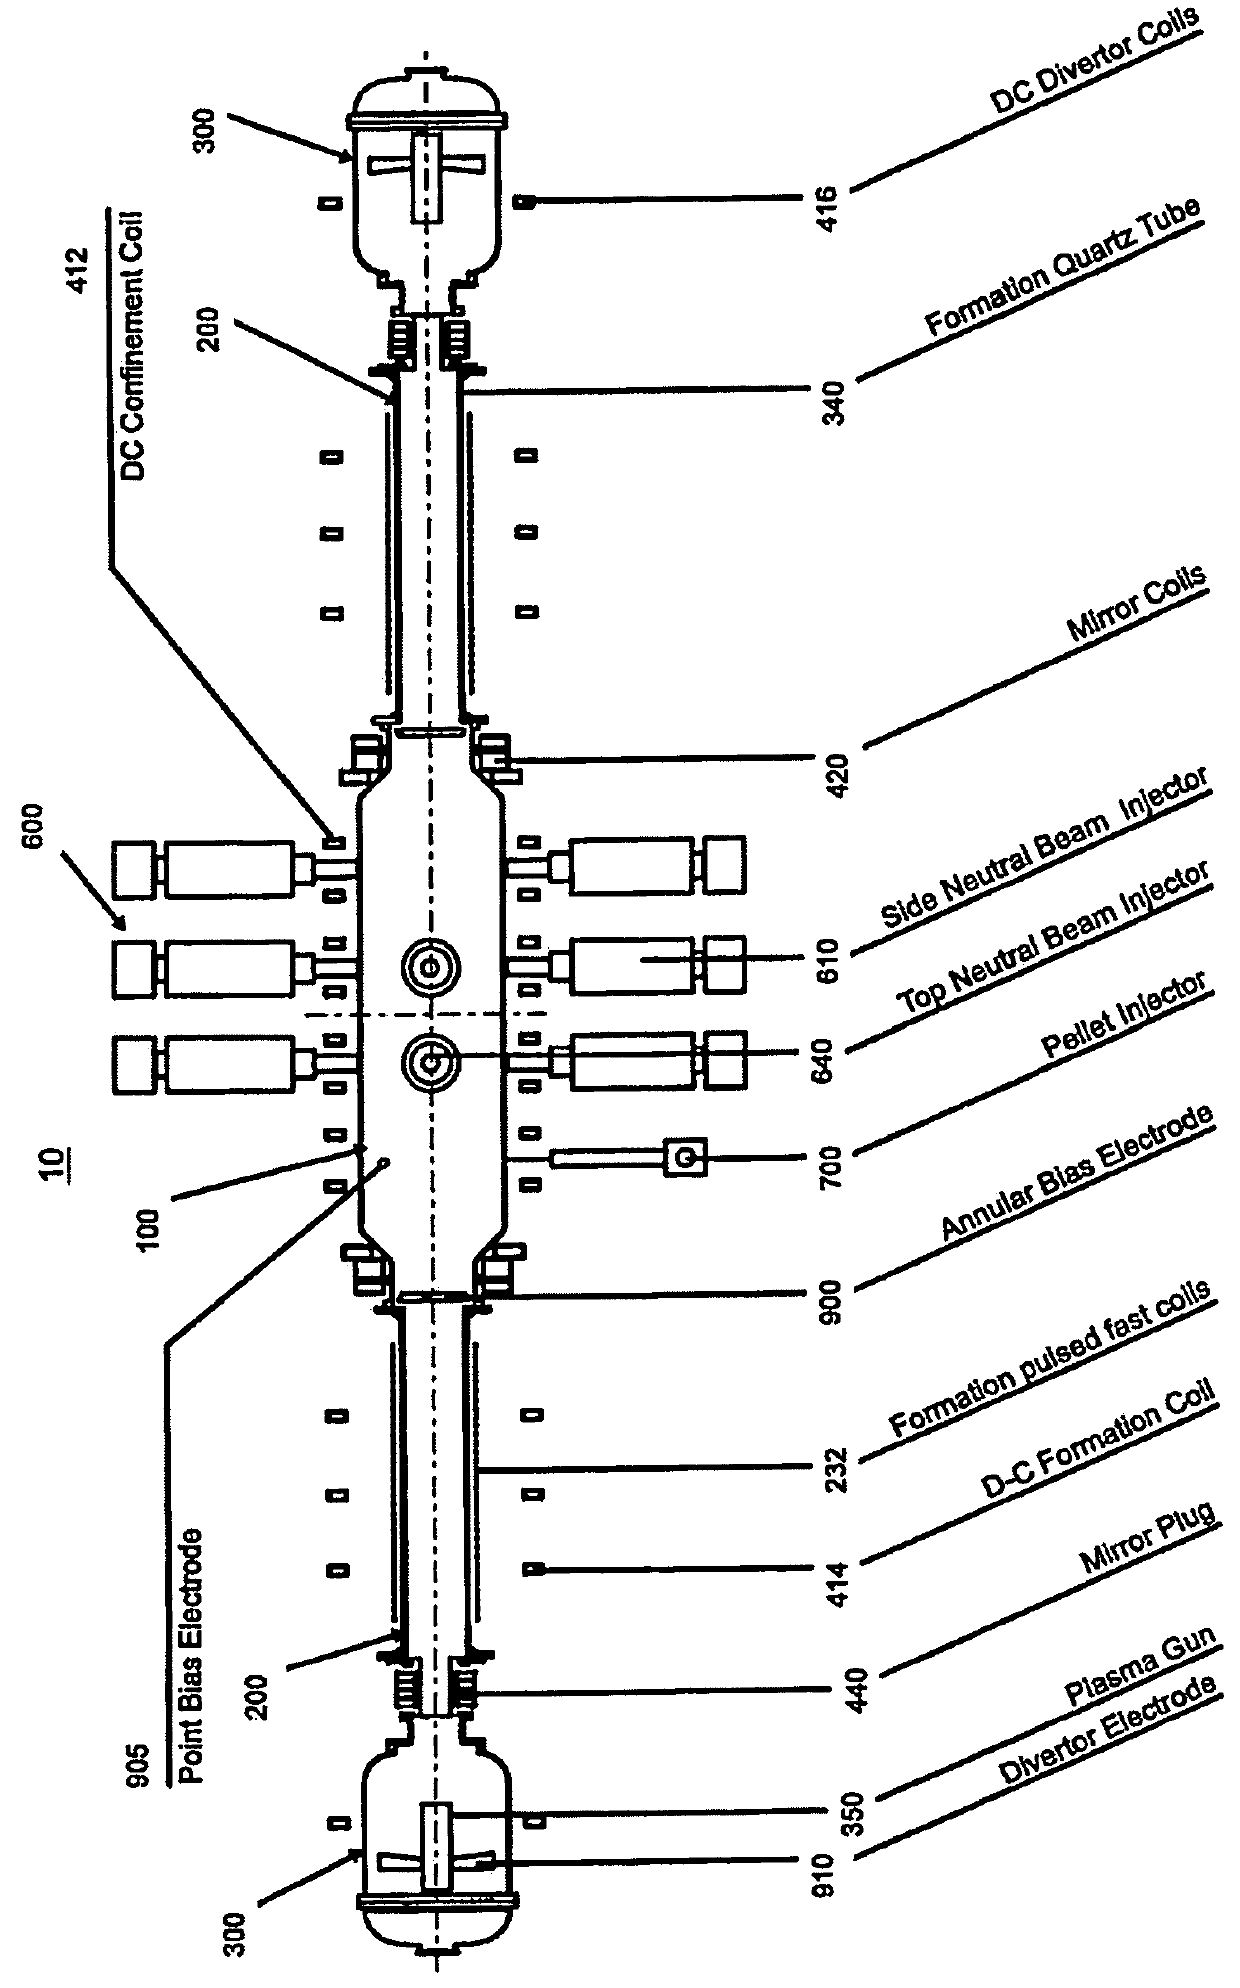 Systems and methods for forming and maintaining a high performance FRC